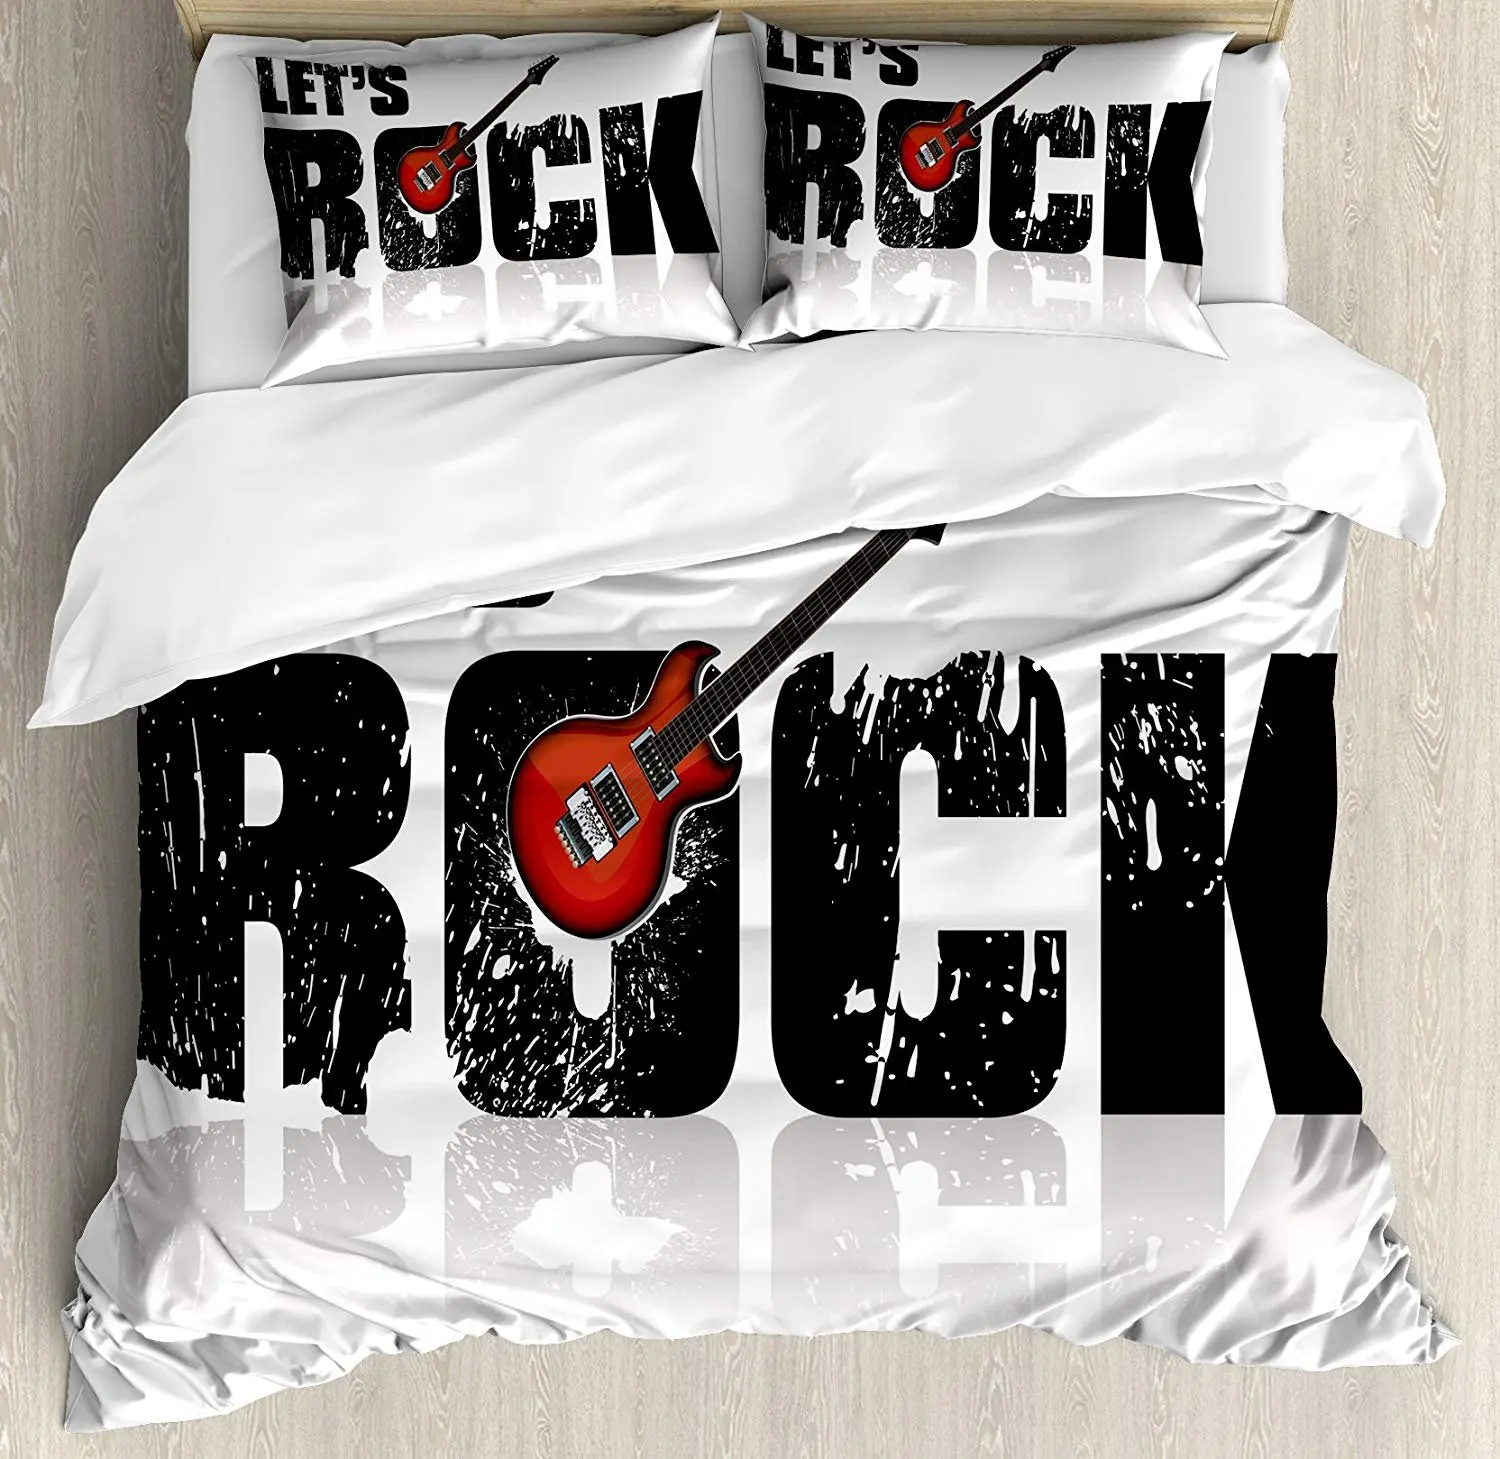 

Guitar Bedding Set Let's Rock Text with Grunge Looking Color Splashed Letters Music Fun Concert Duvet Cover Pillowcase for Home